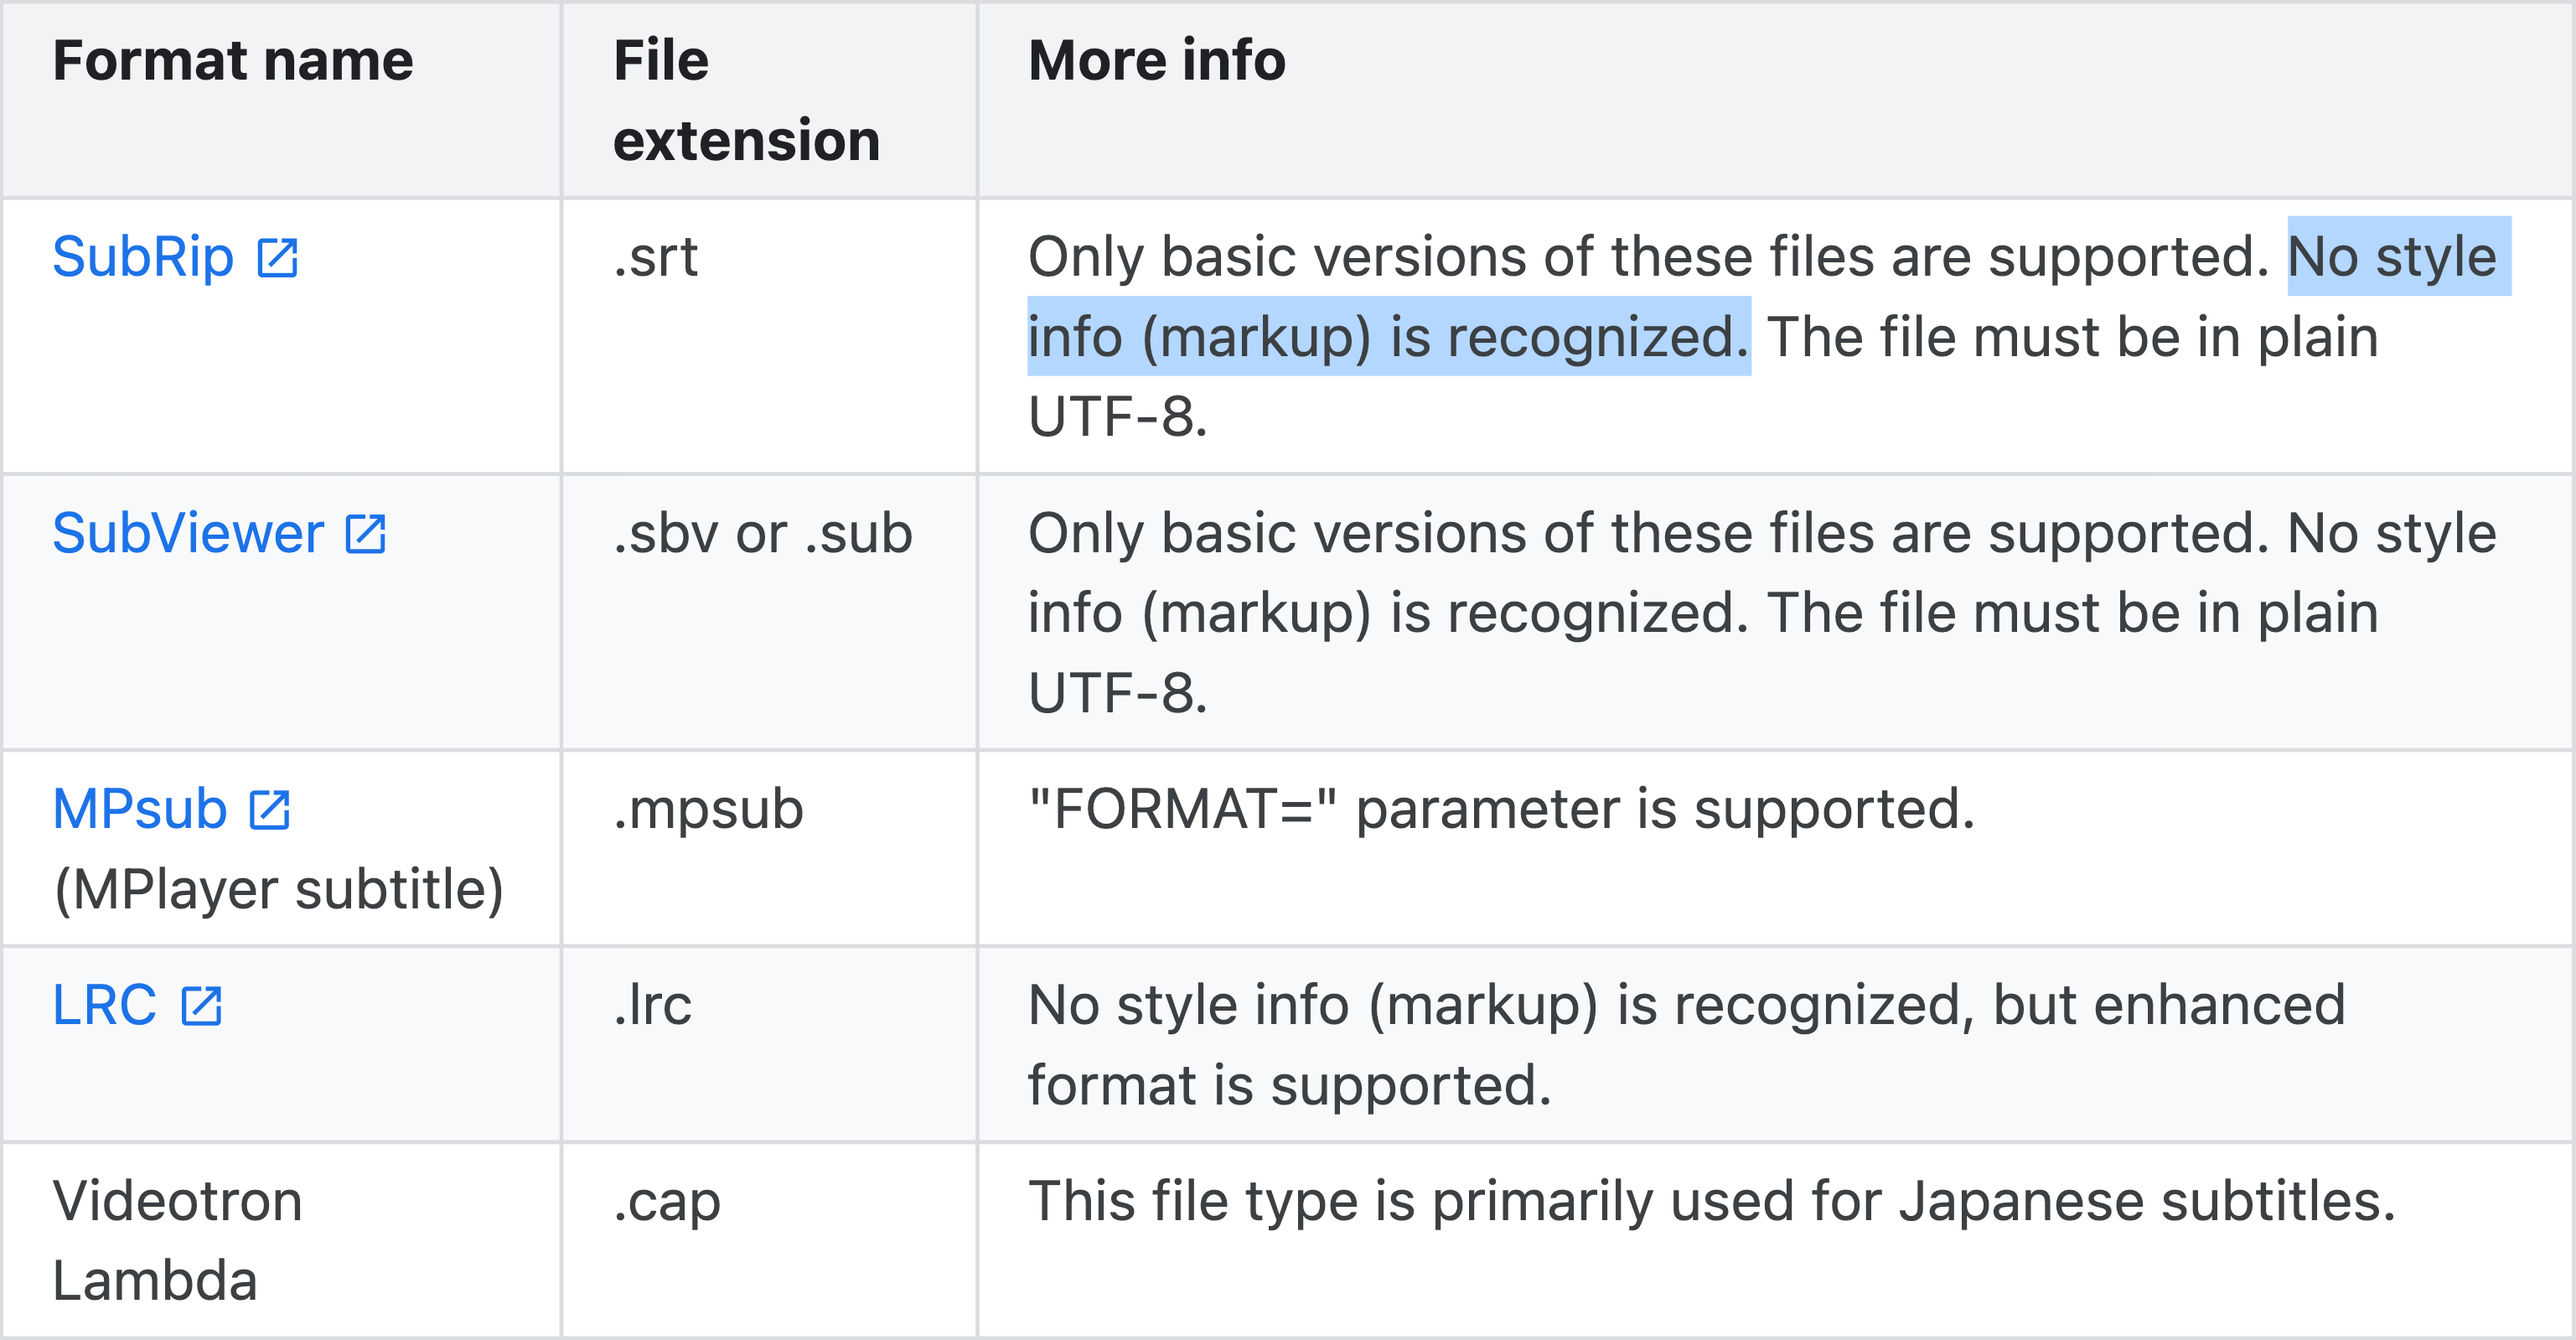 No style info (markup) is recognized in SubRip.